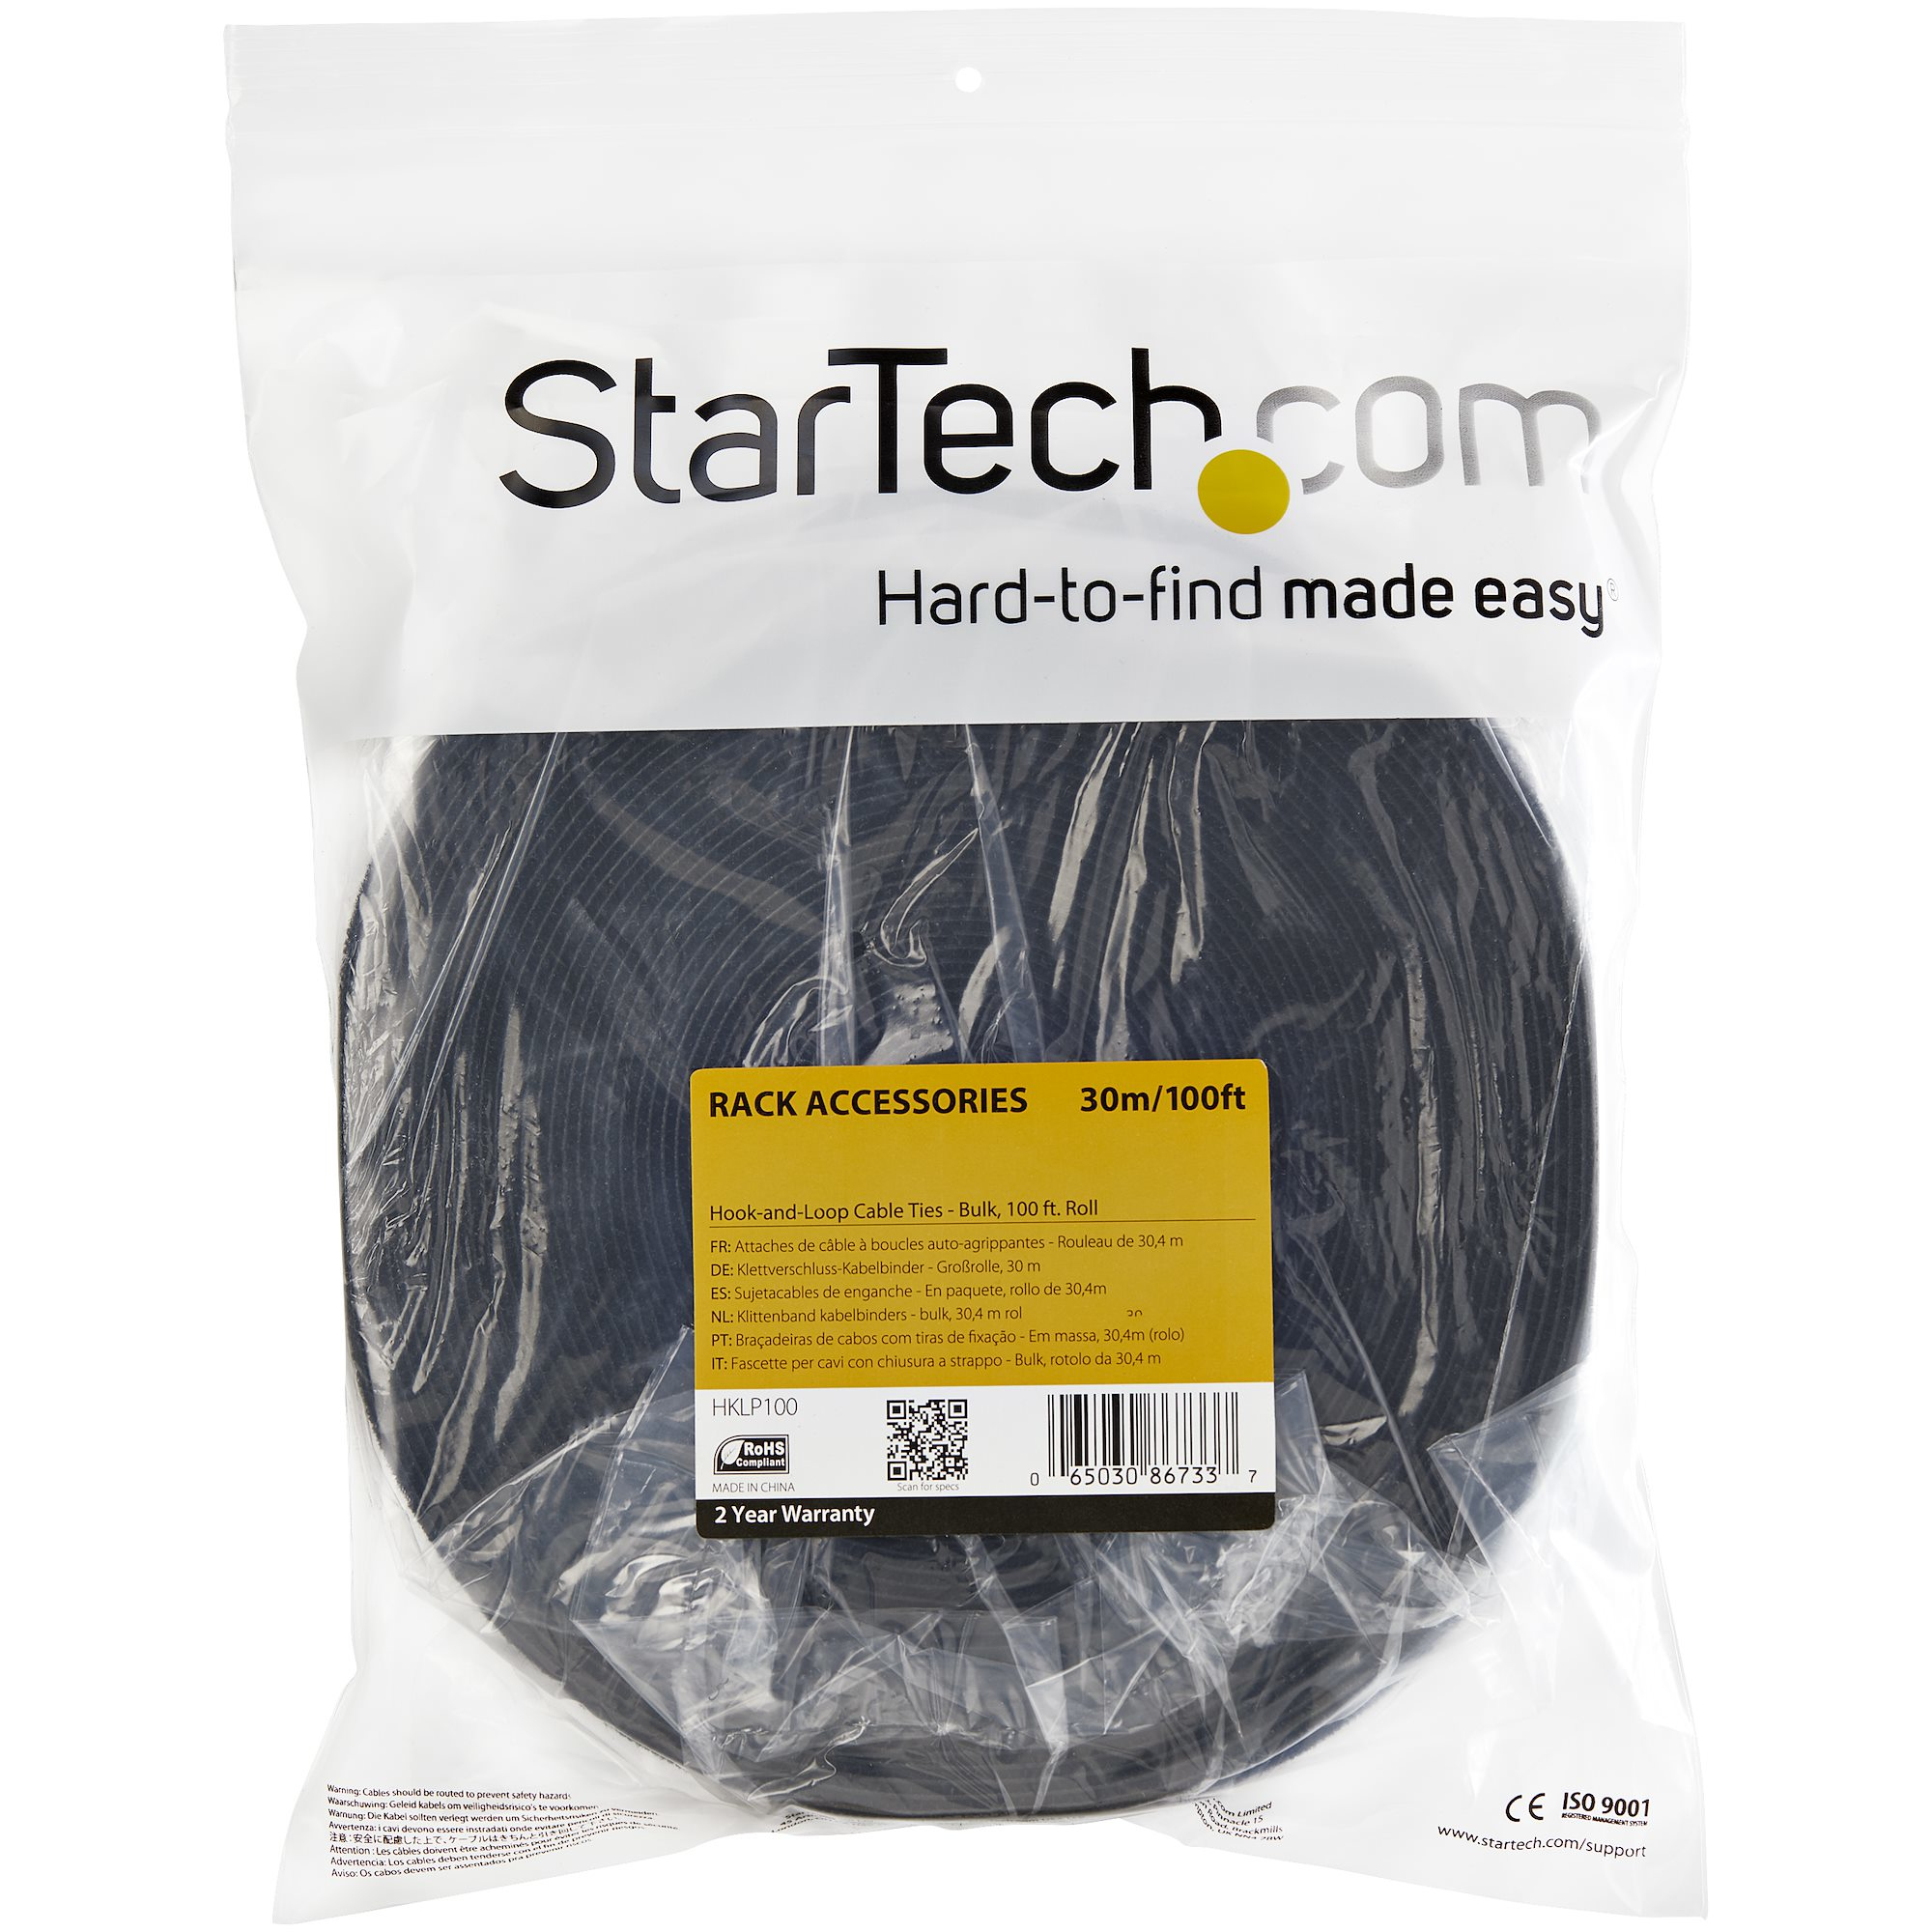 StarTech.com HKLP100 cable tie Hook & loop cable tie Nylon Black 1 pc(s),  563 in distributor/wholesale stock for resellers to sell - Stock In The  Channel